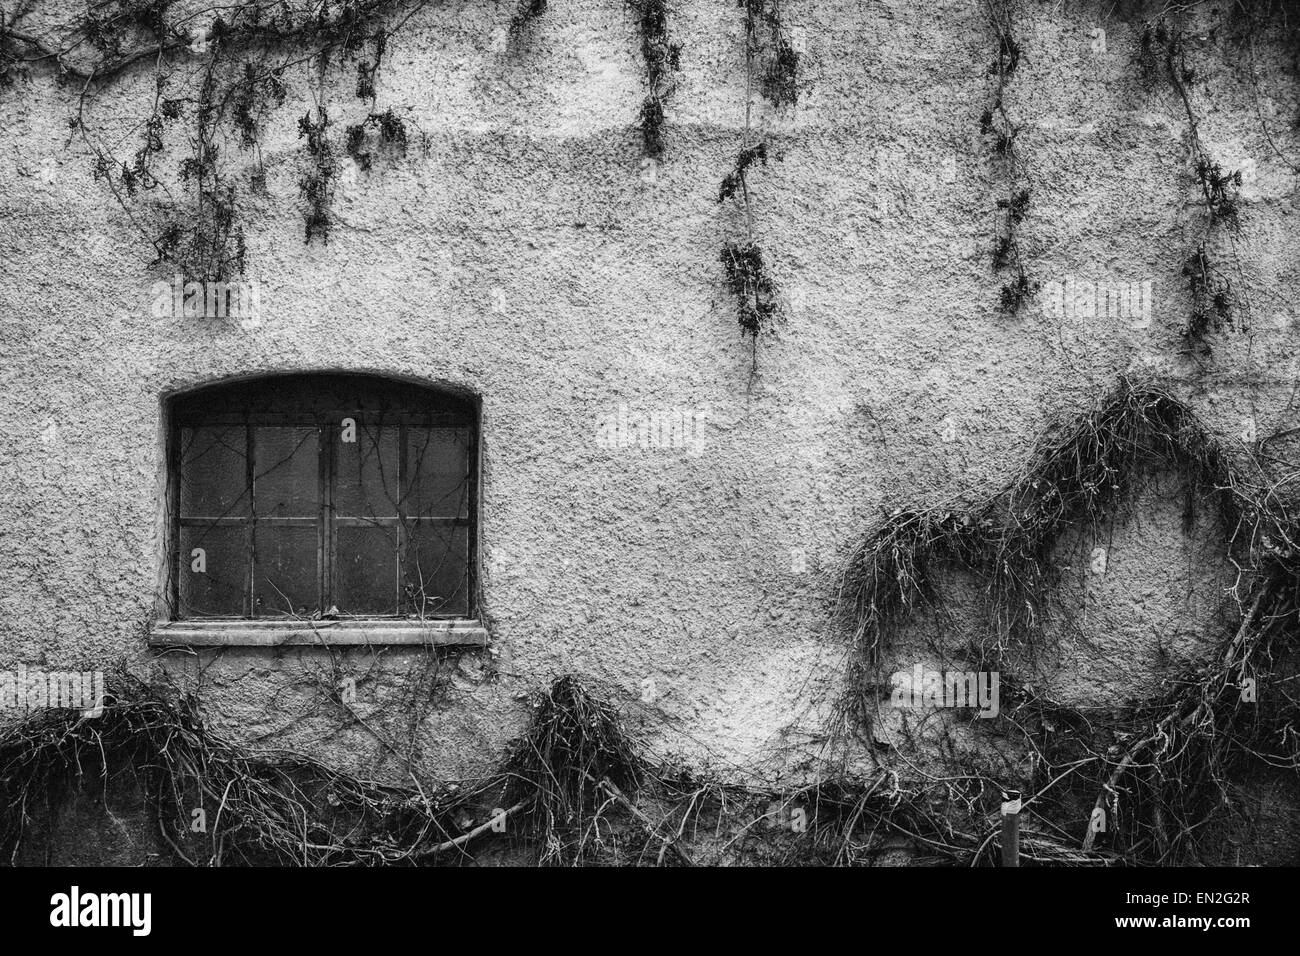 Dorf Black and White Stock Photos & Images - Alamy